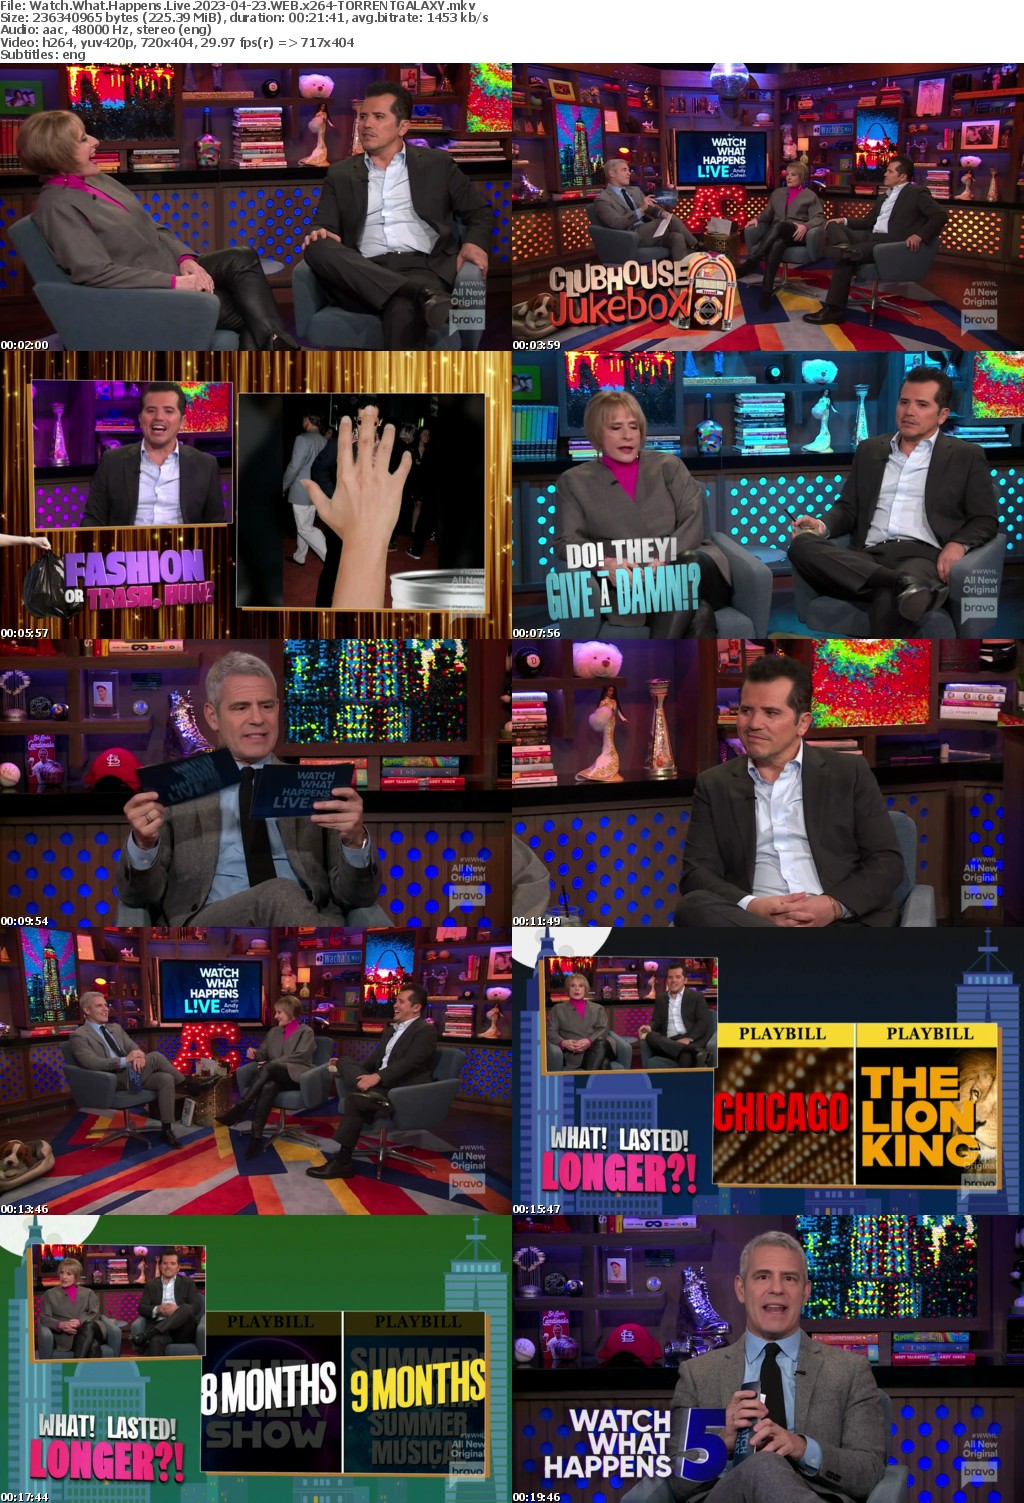 Watch What Happens Live 2023-04-23 WEB x264-GALAXY